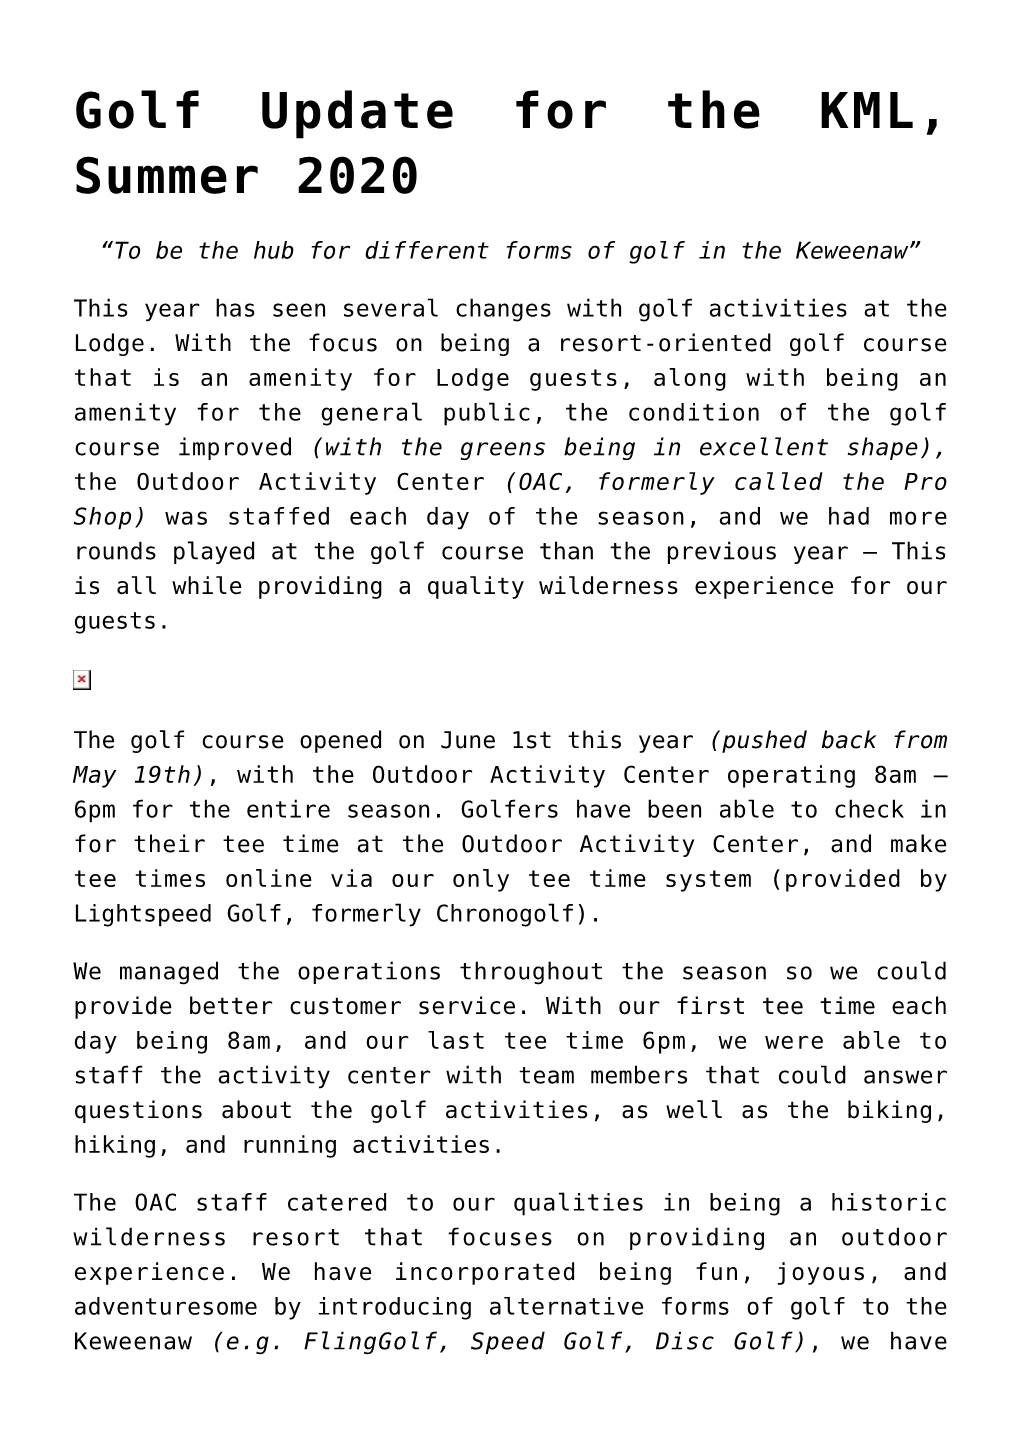 Golf Update for the KML, Summer 2020